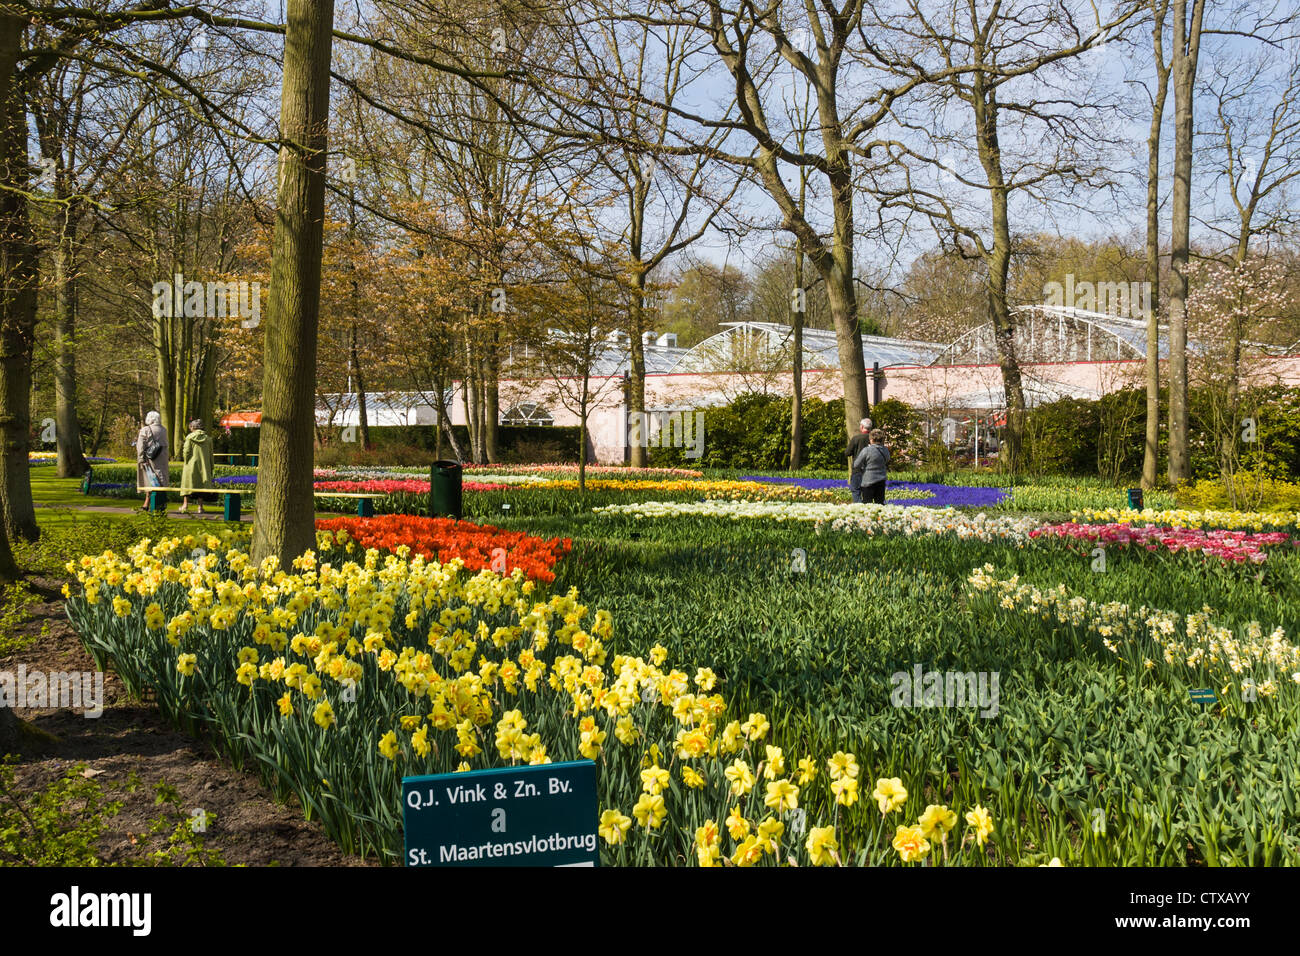 Willem-Alexander Pavilion and Greenhouse at Keukenhof Gardens in The Netherlands. Stock Photo